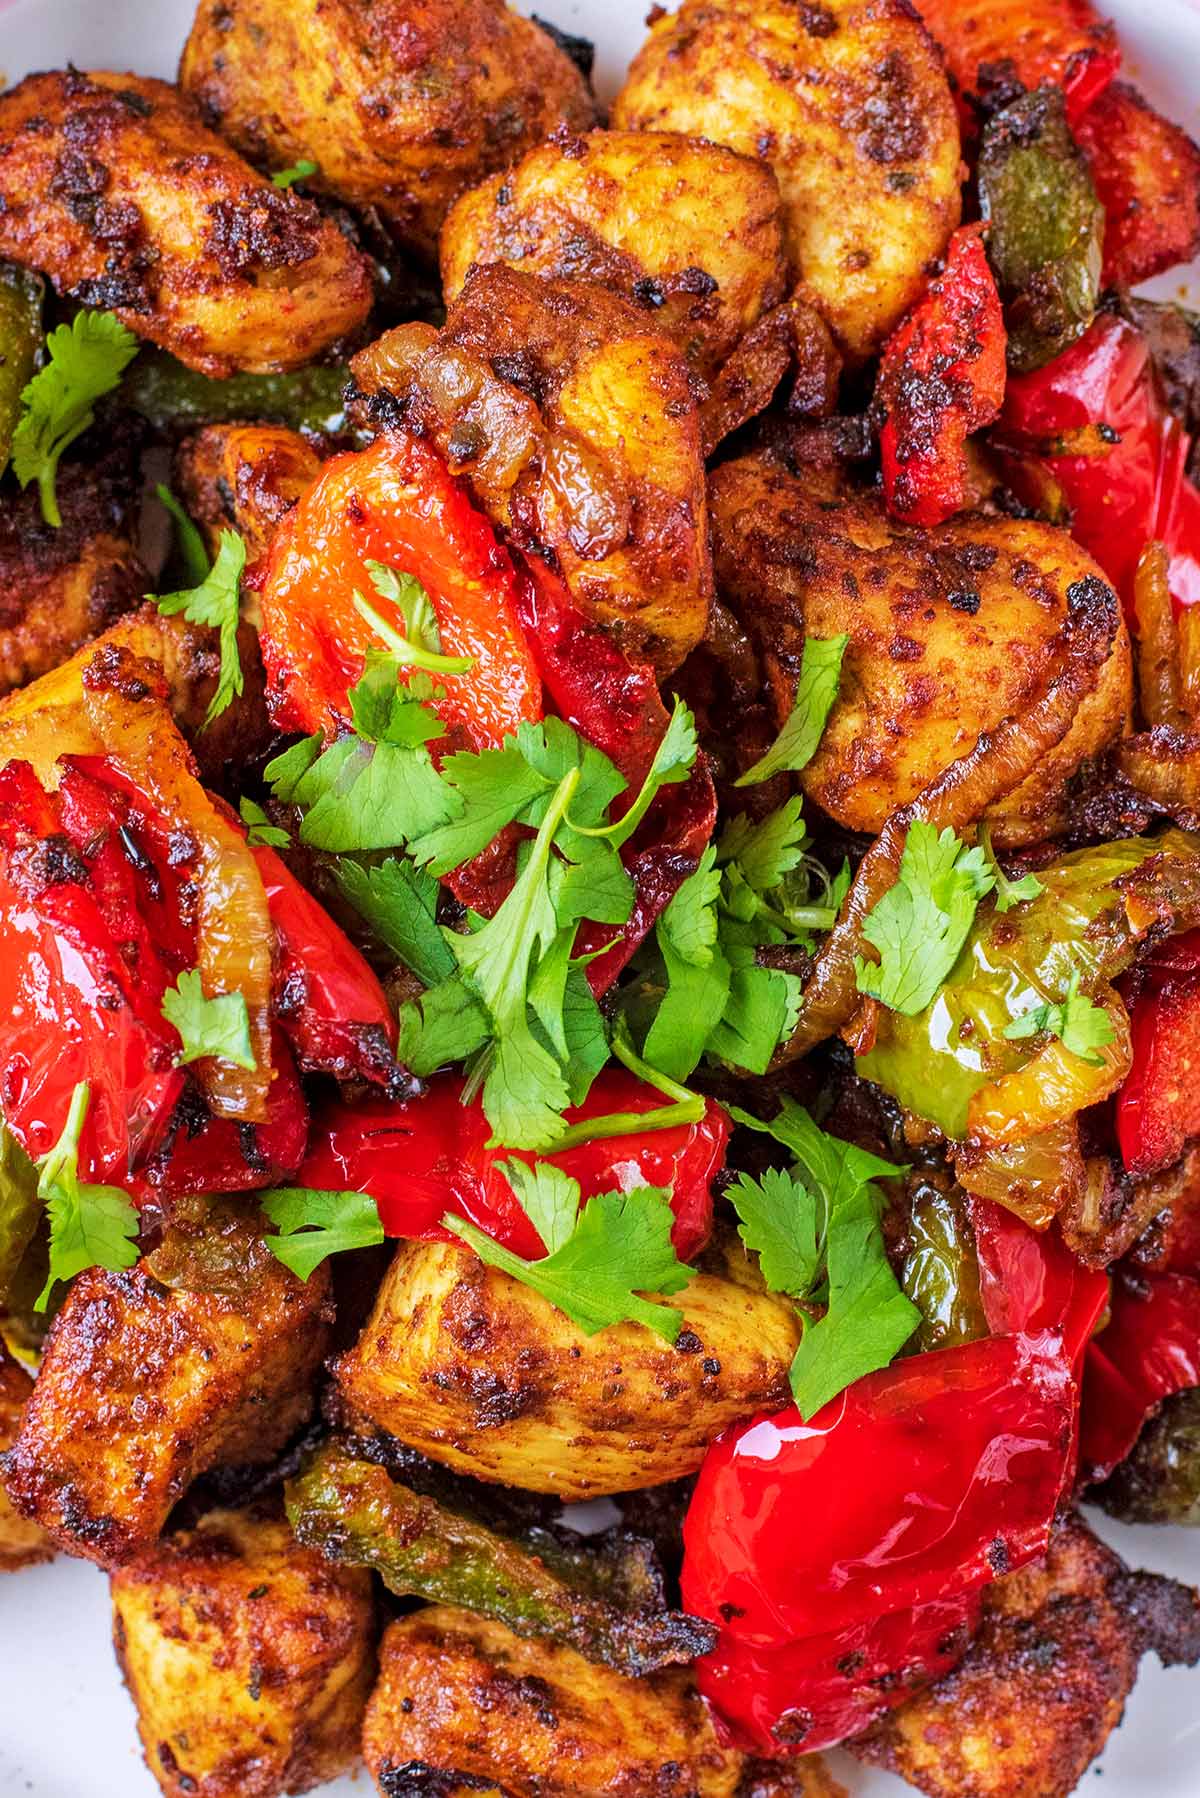 Chicken tikka and chopped vegetables covered in coriander.